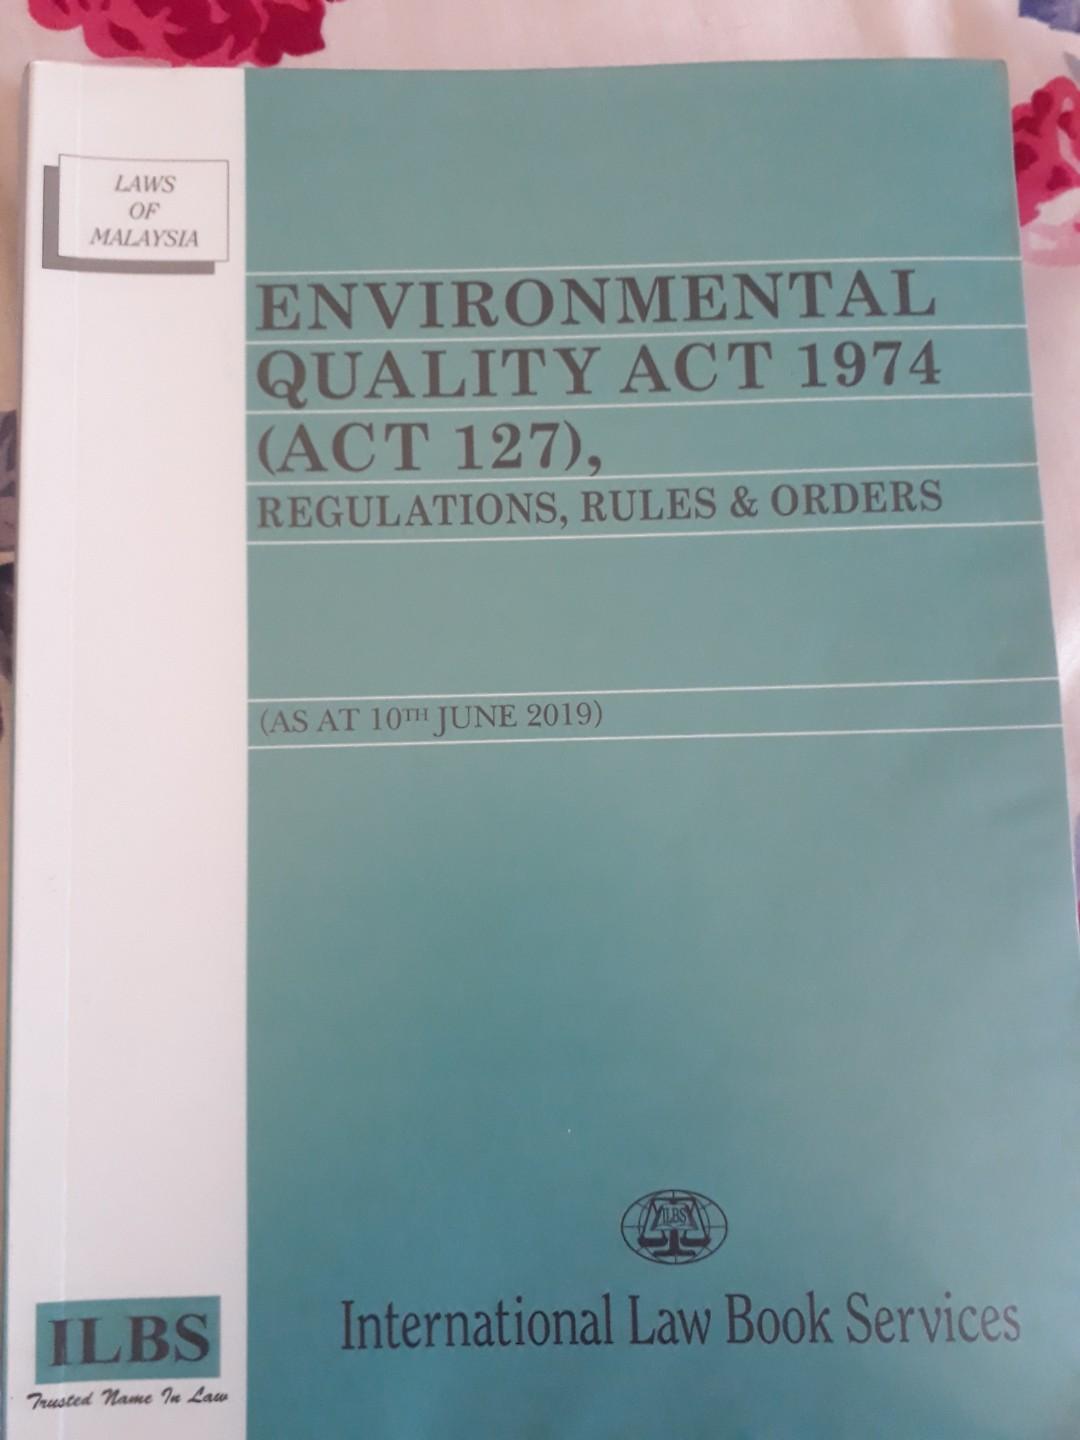 Environmental Quality Act 1974 (as of June 2019), Textbooks on 